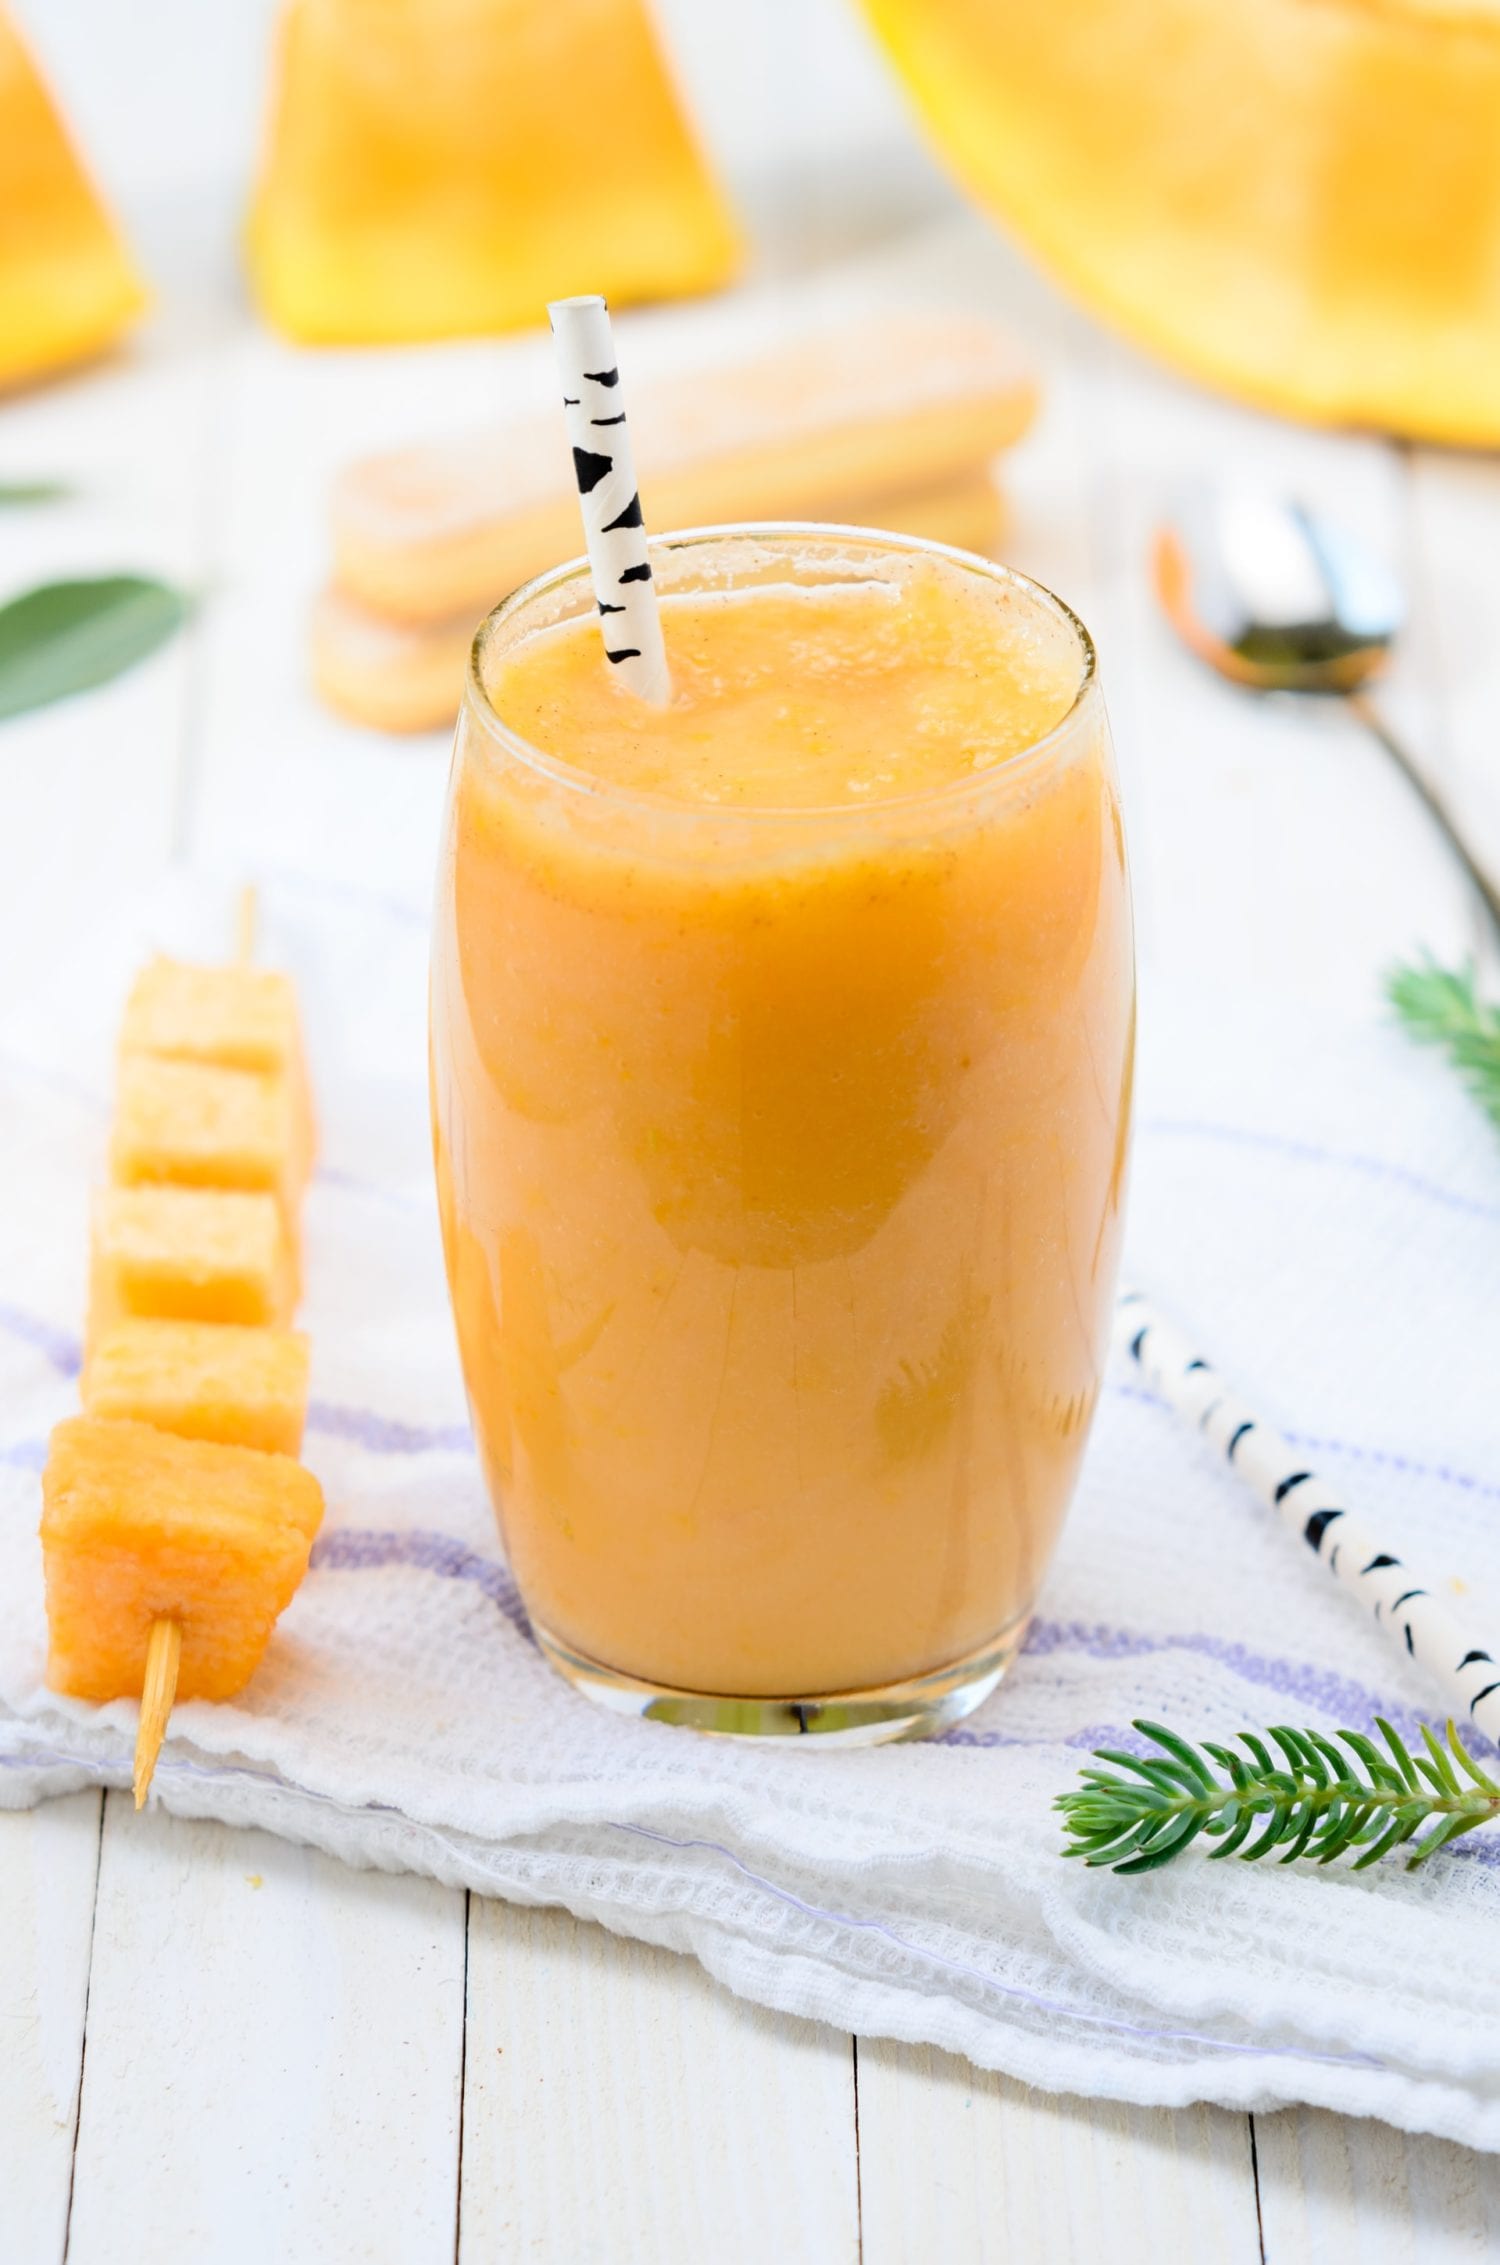 Pineapple carrot juice in glass on white table